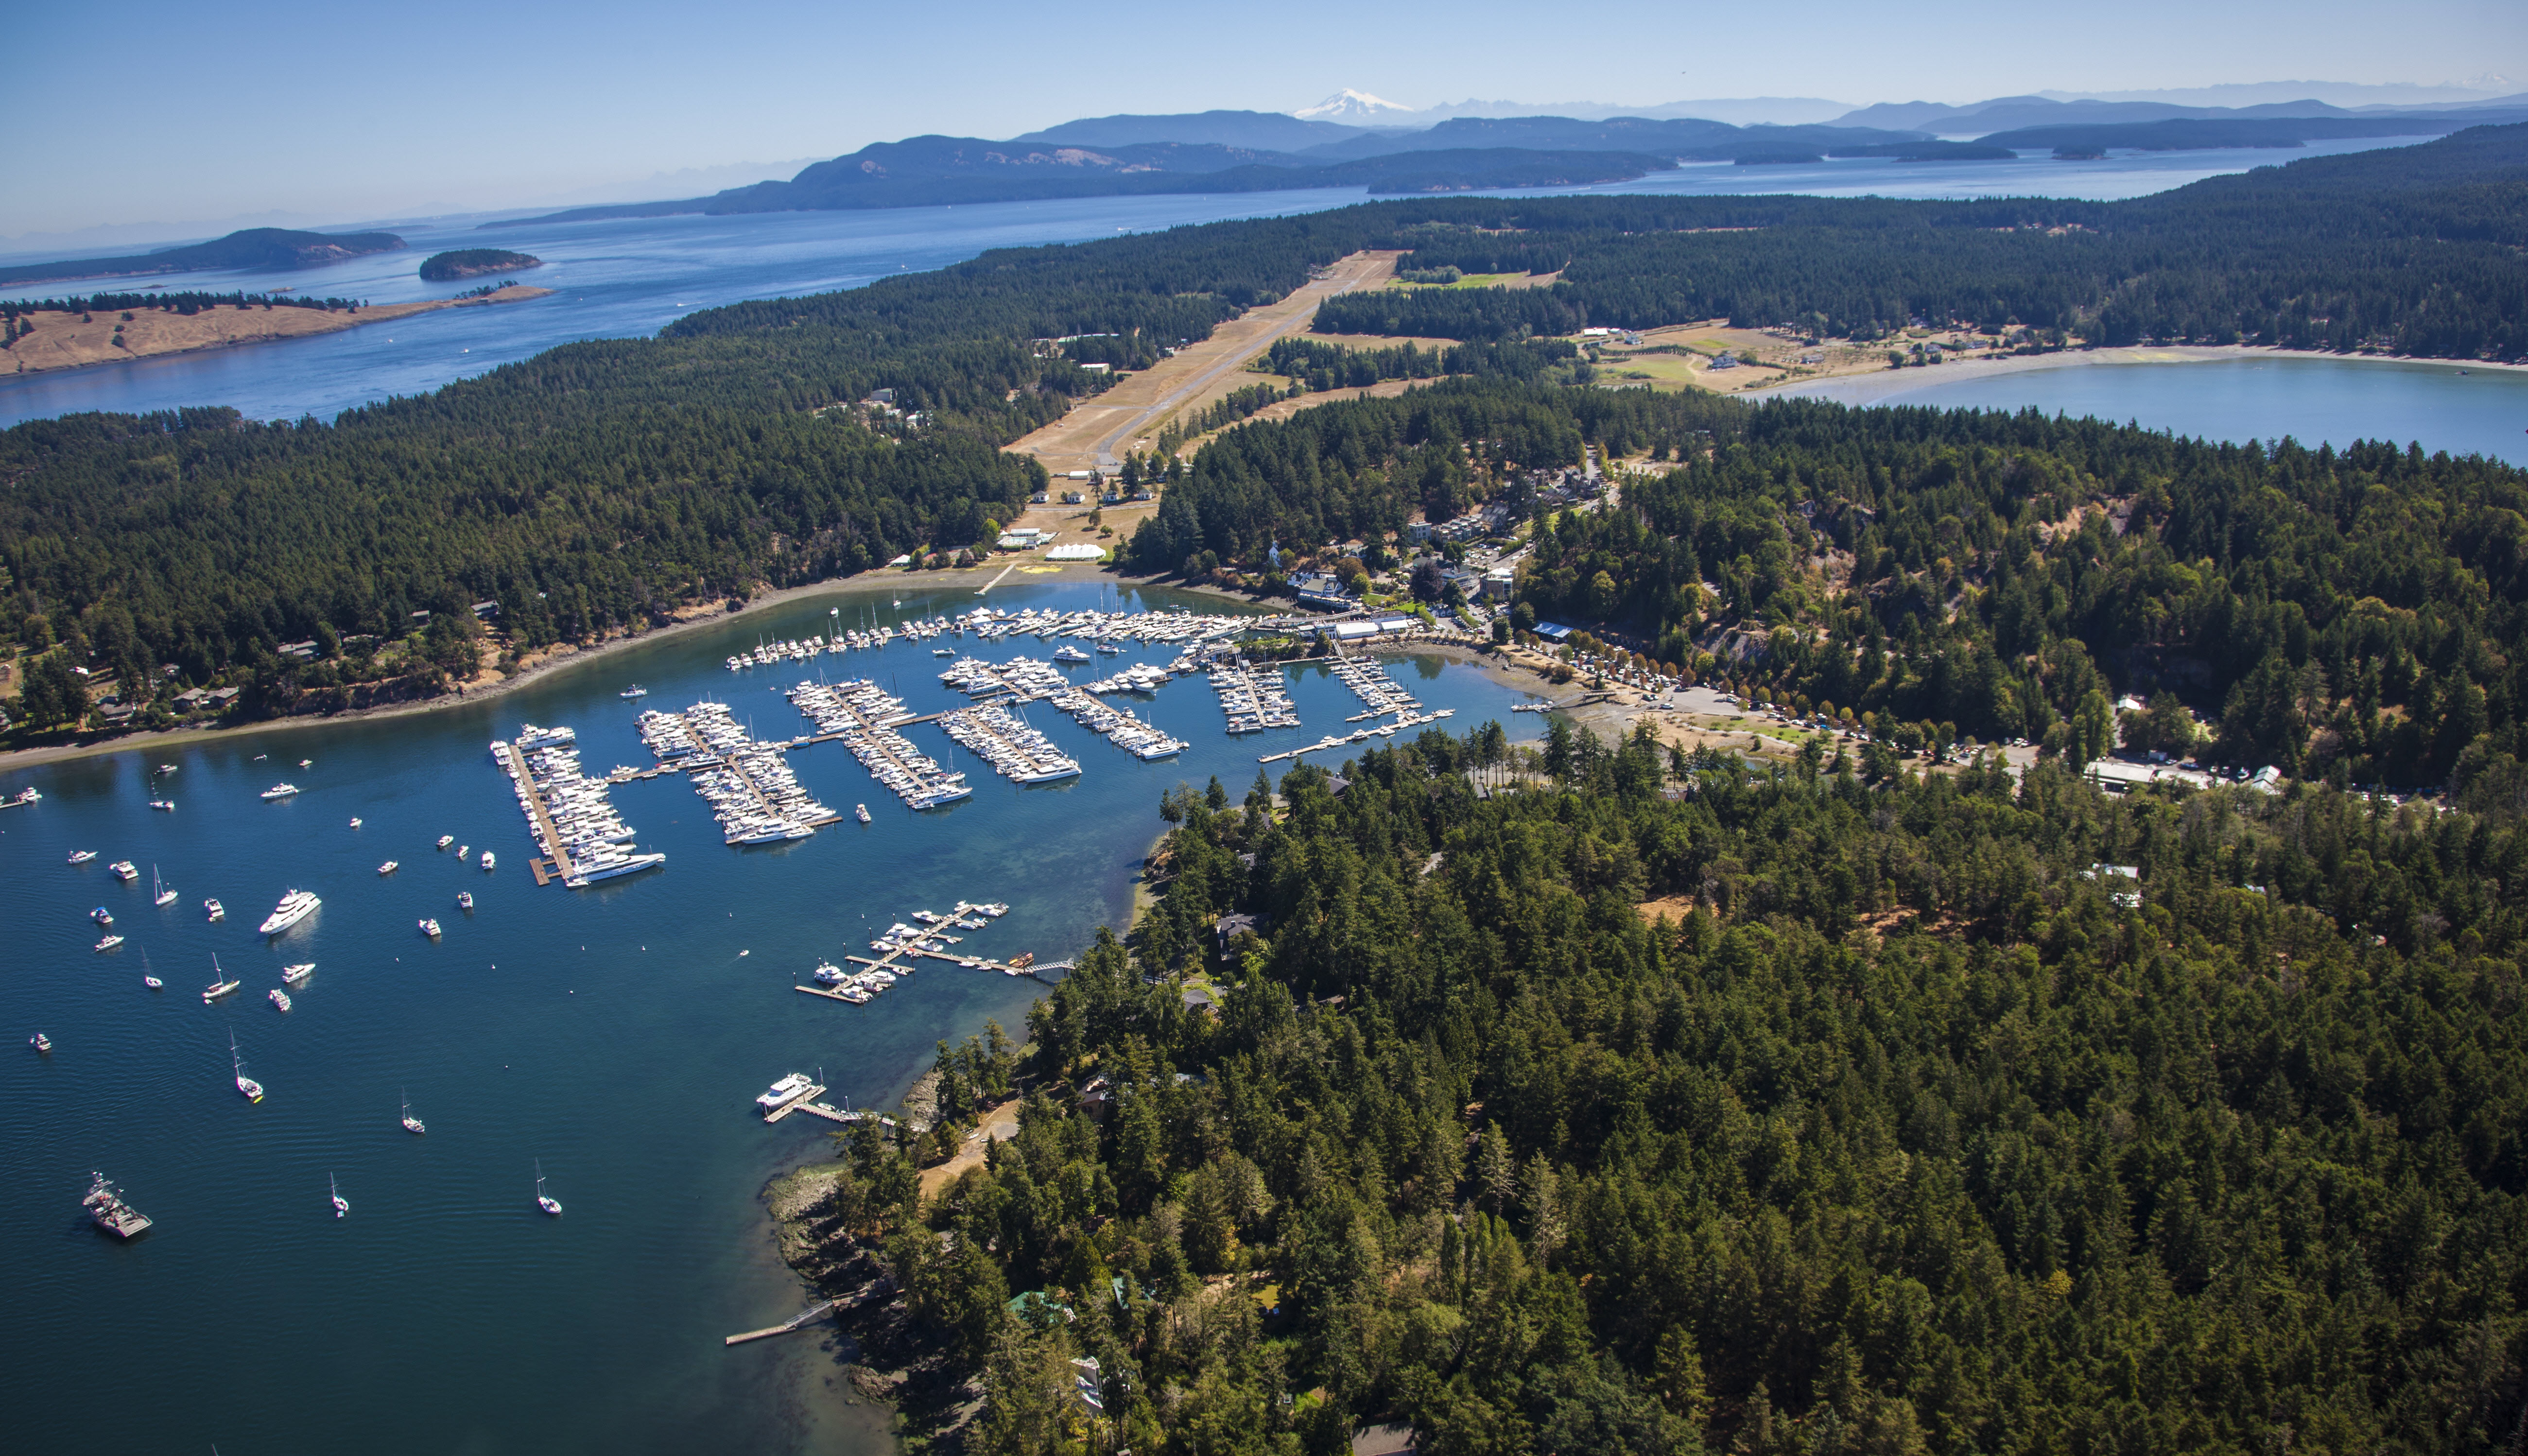 A view of Roche Harbor seen at Wings Over Washington